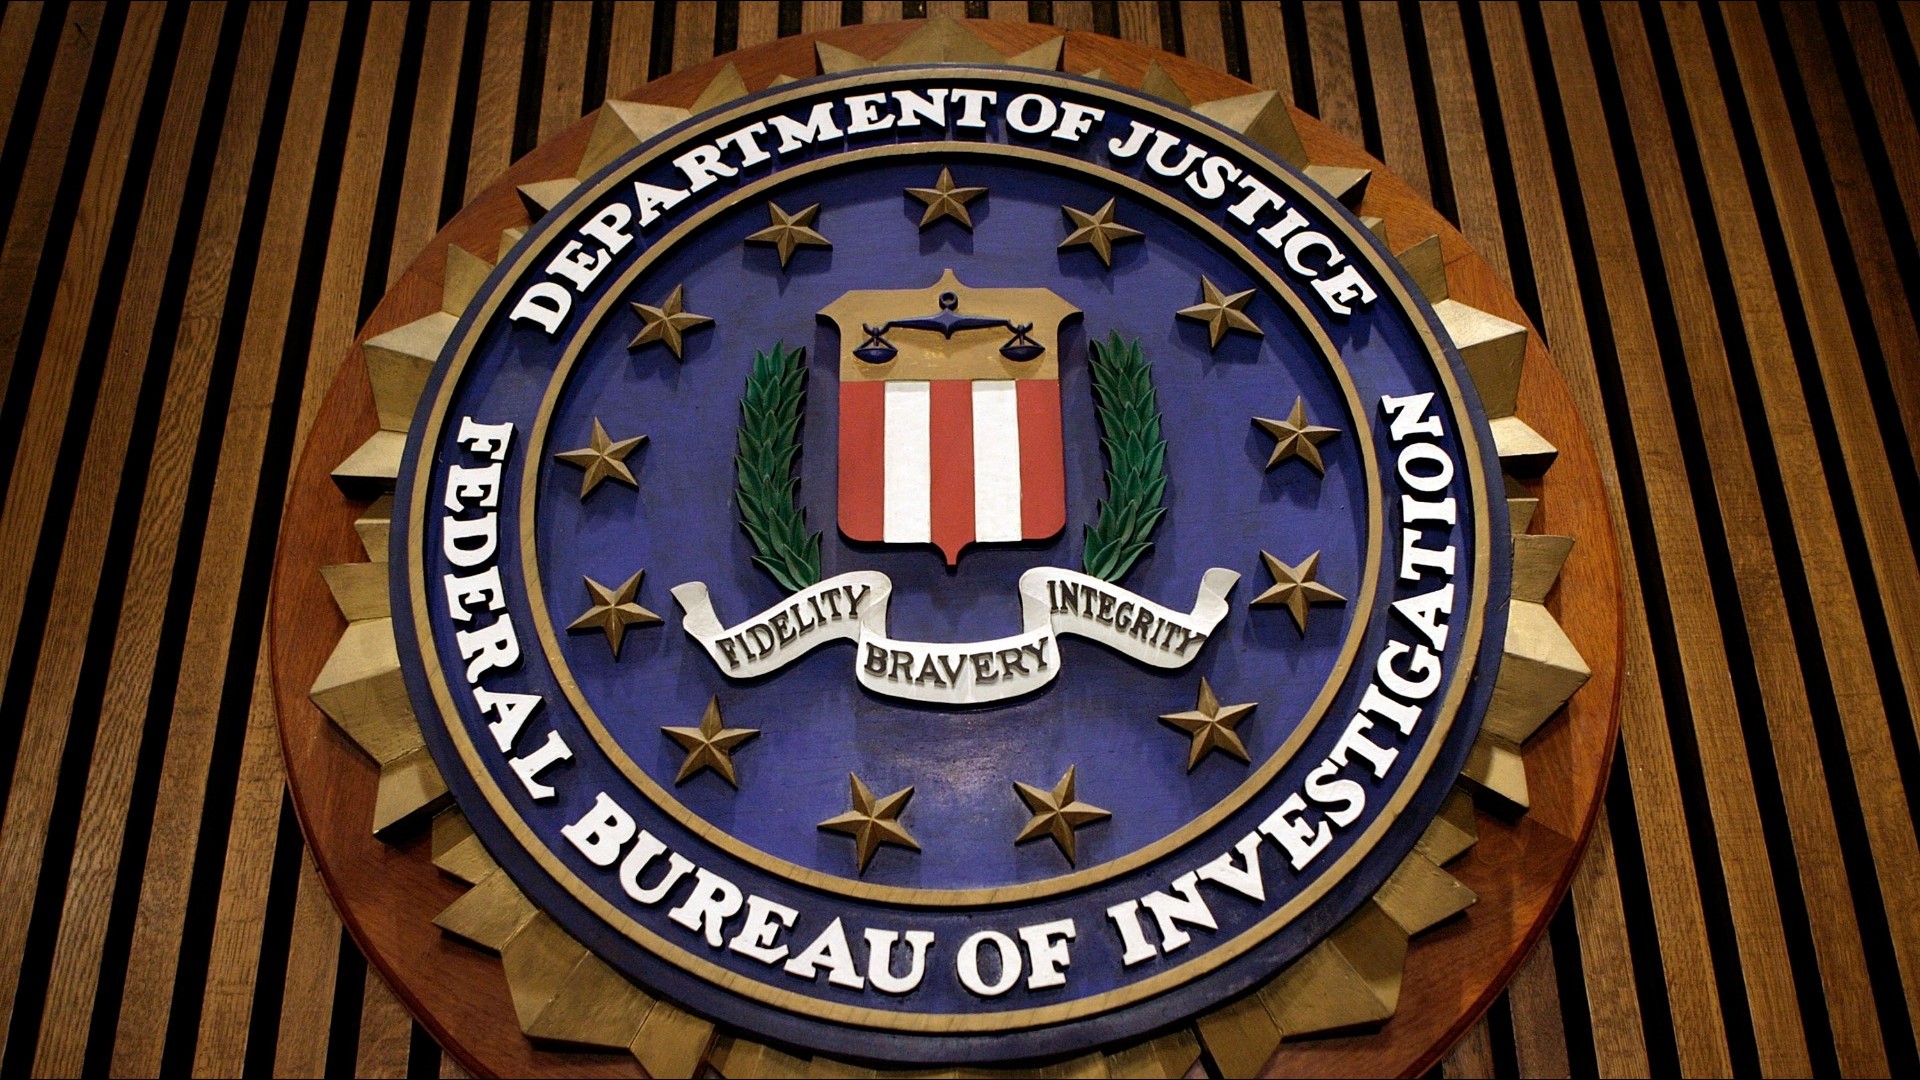 The FBI said it will place ads on billboards and buses